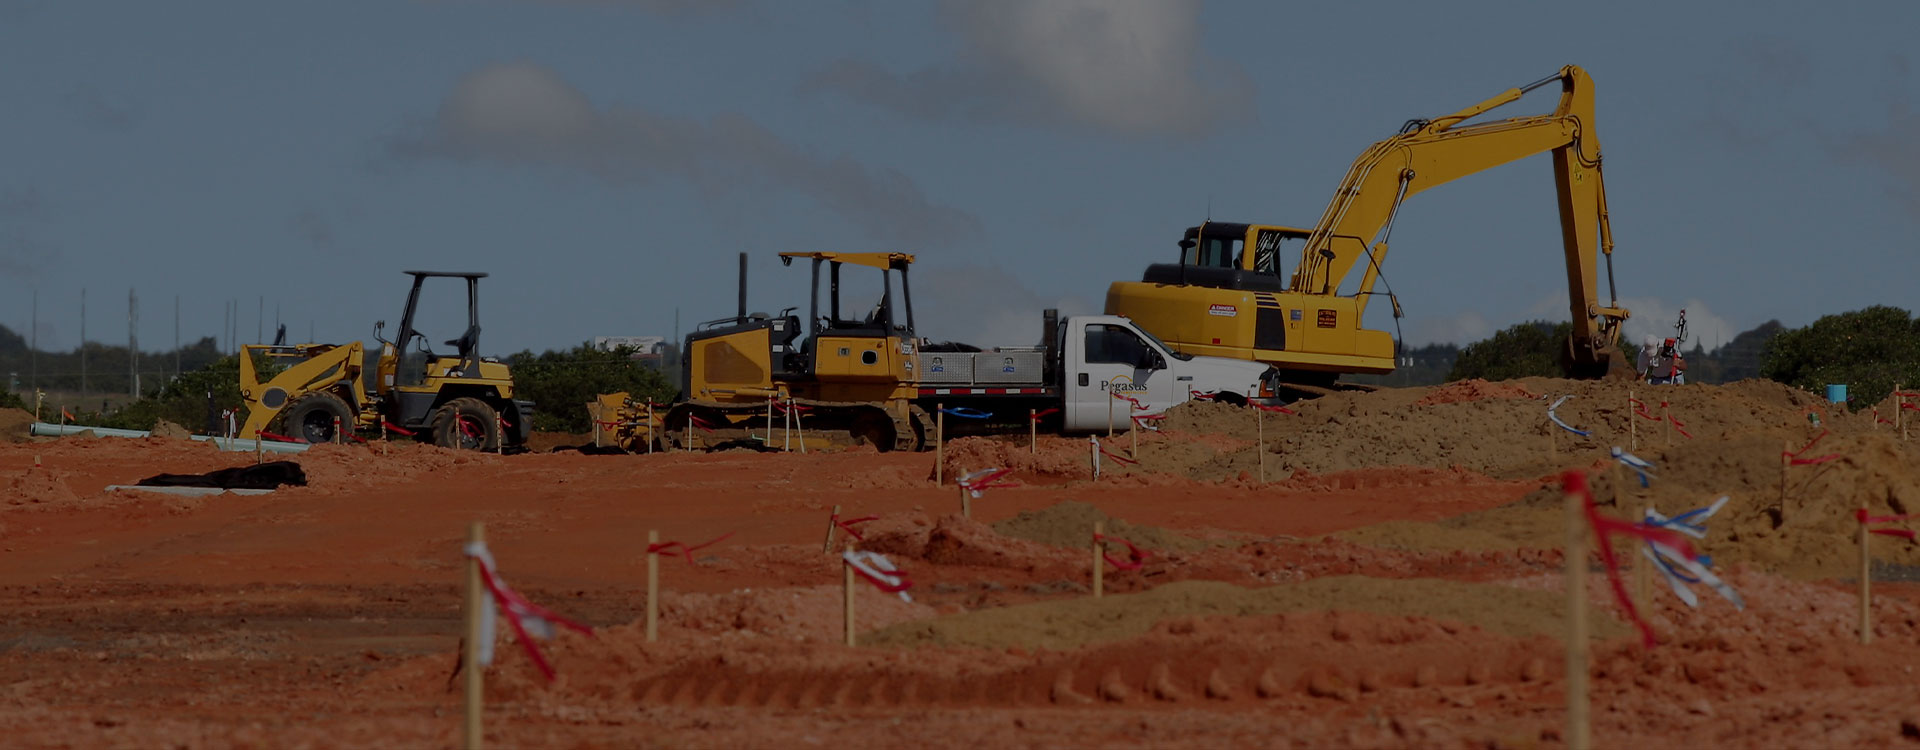 A group of construction equipment on a dirt field.